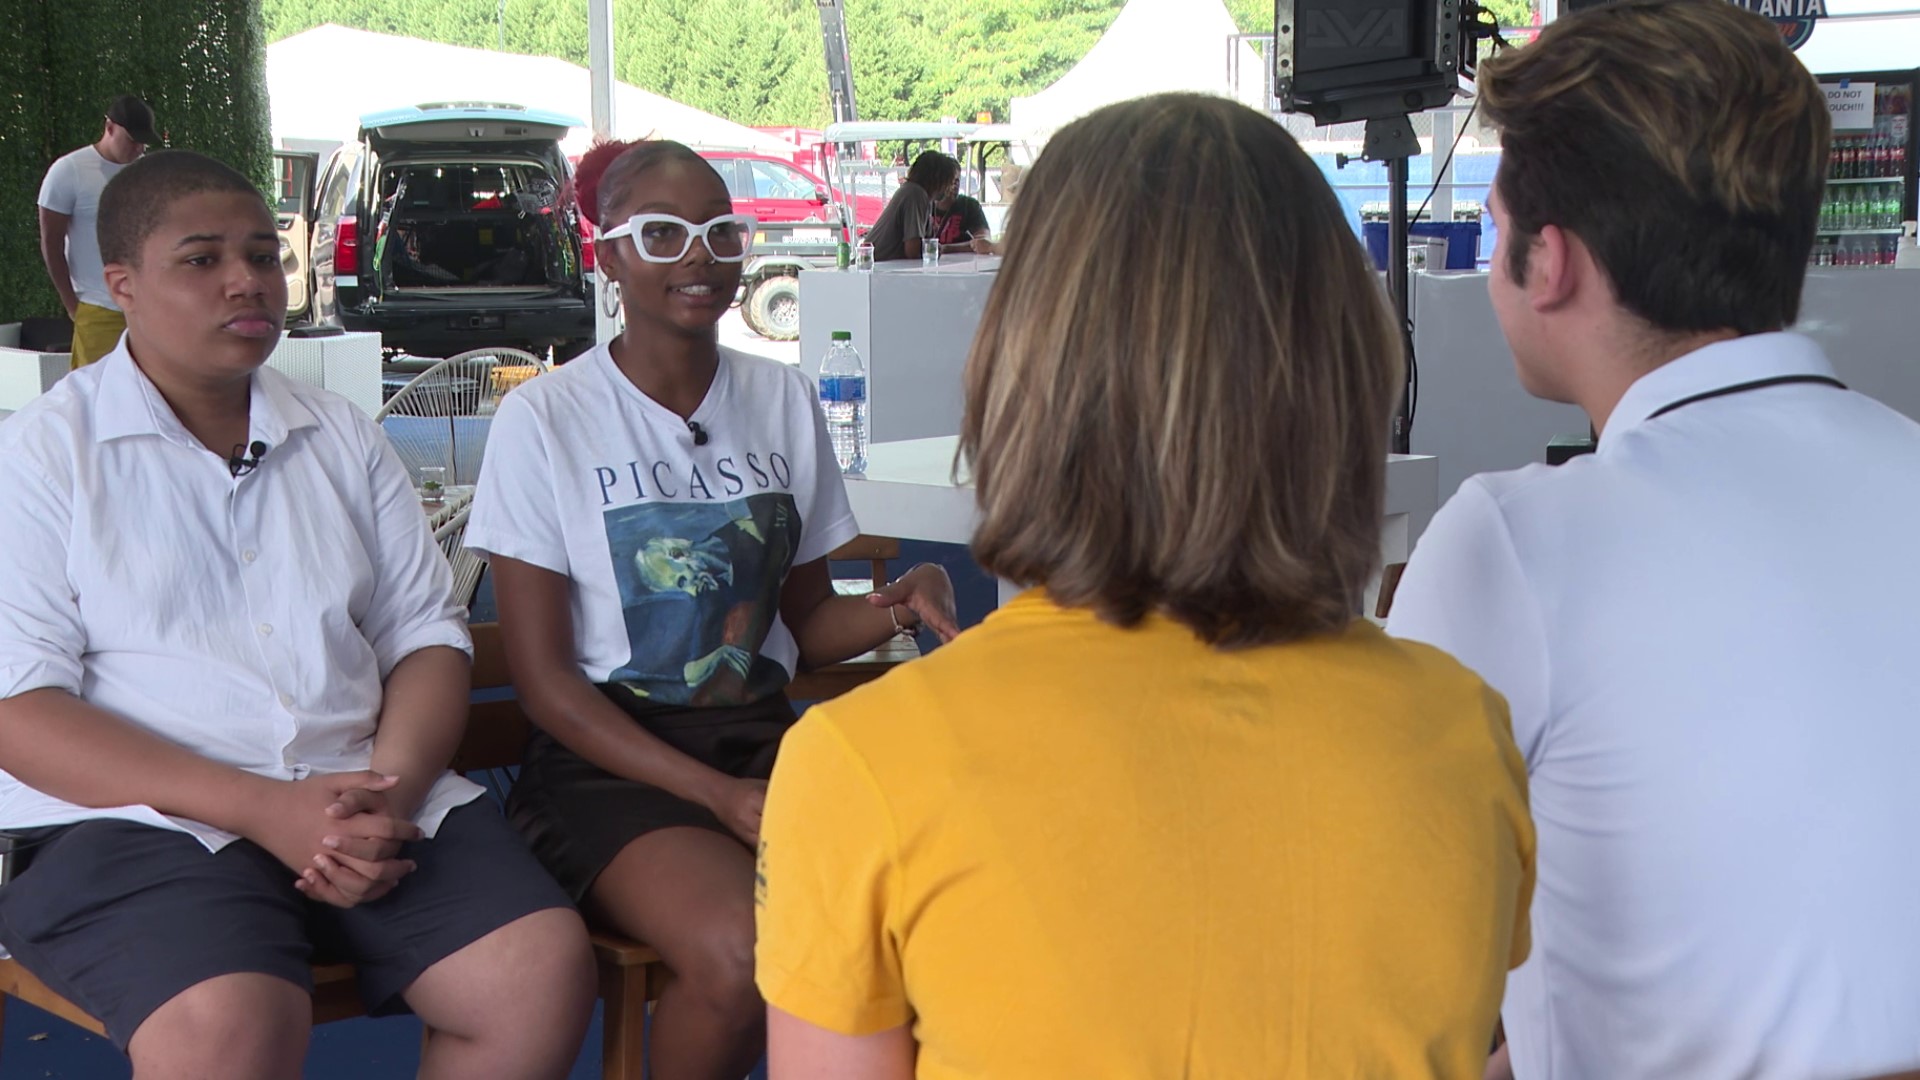 11Alive paired two teens with Savannah College of Art and Design (SCAD) graduates and professors at the Atlanta Open to teach them all about the possibilities.